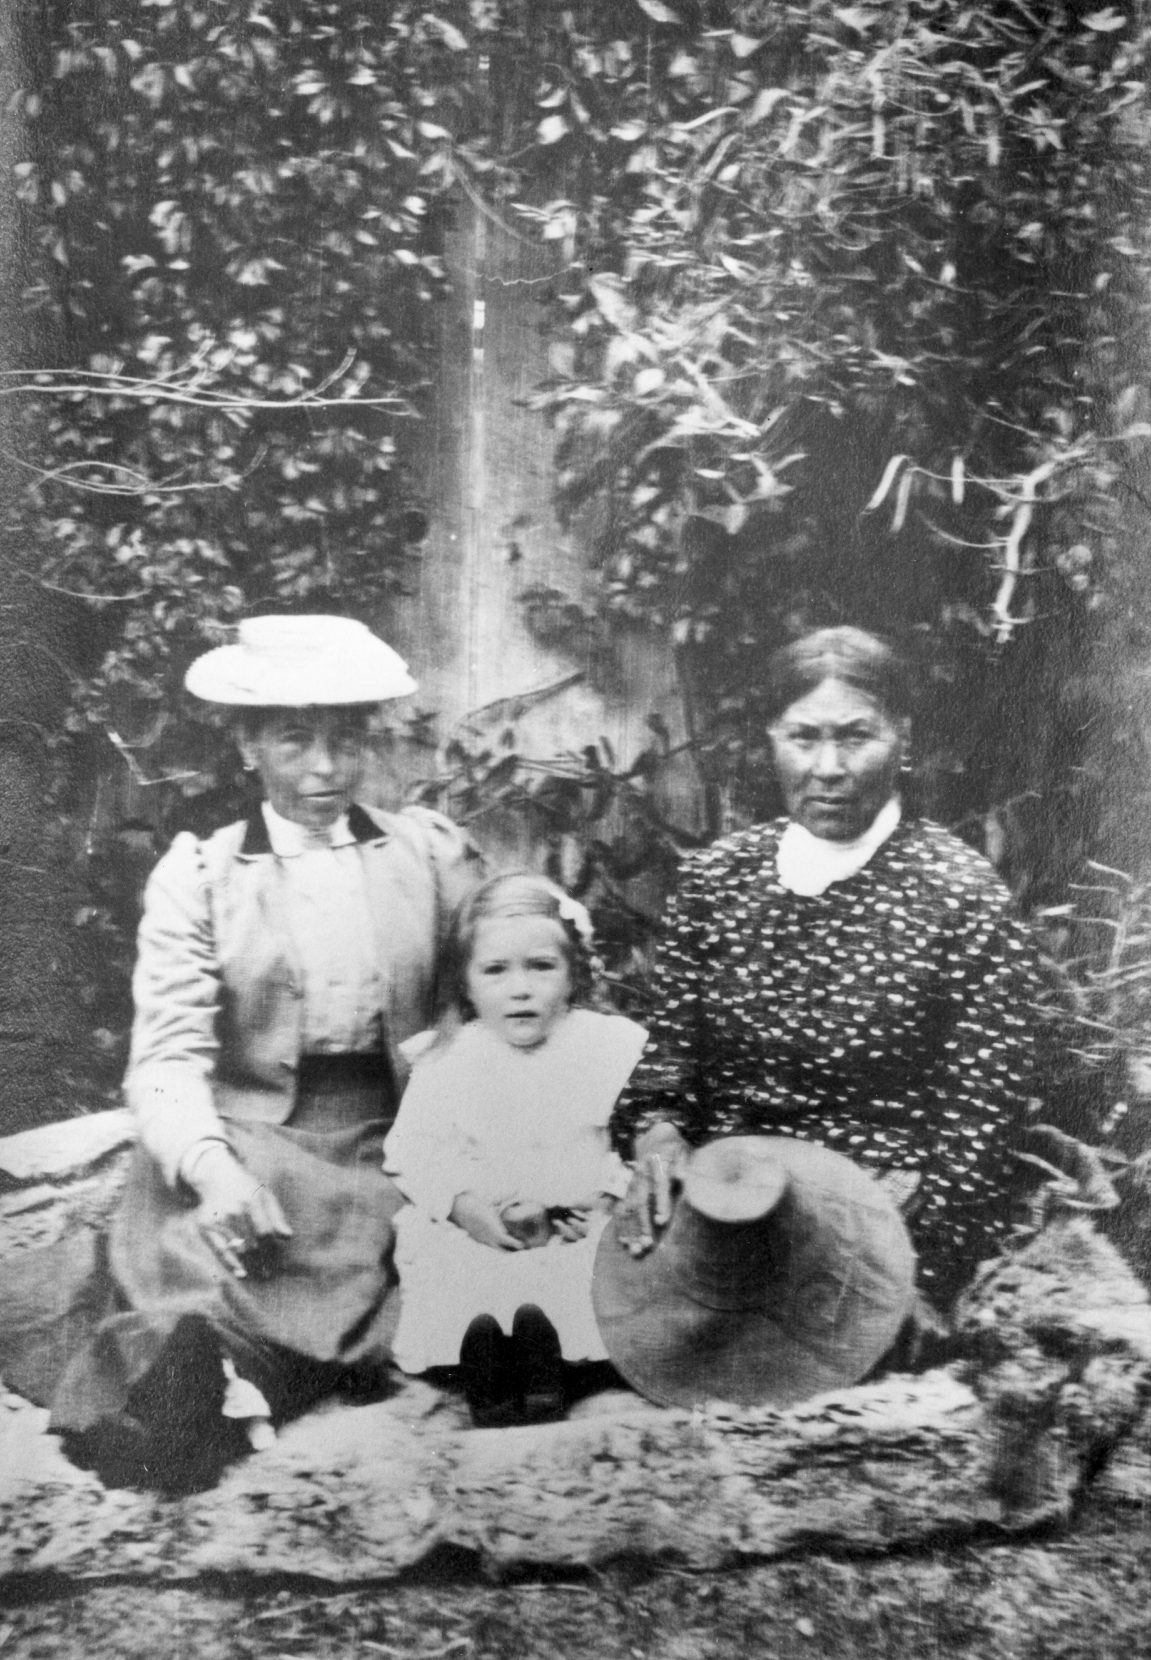 Puunnii, the second wife of the author’s great-great-grandfather, was a highborn First Nation healer also known as Polly. In this archival photograph, she poses with her daughter, Maggie Lauder, and granddaughter, Helen Simpson. Photo: Alberni Valley Museum Photograph Collection PN01705.